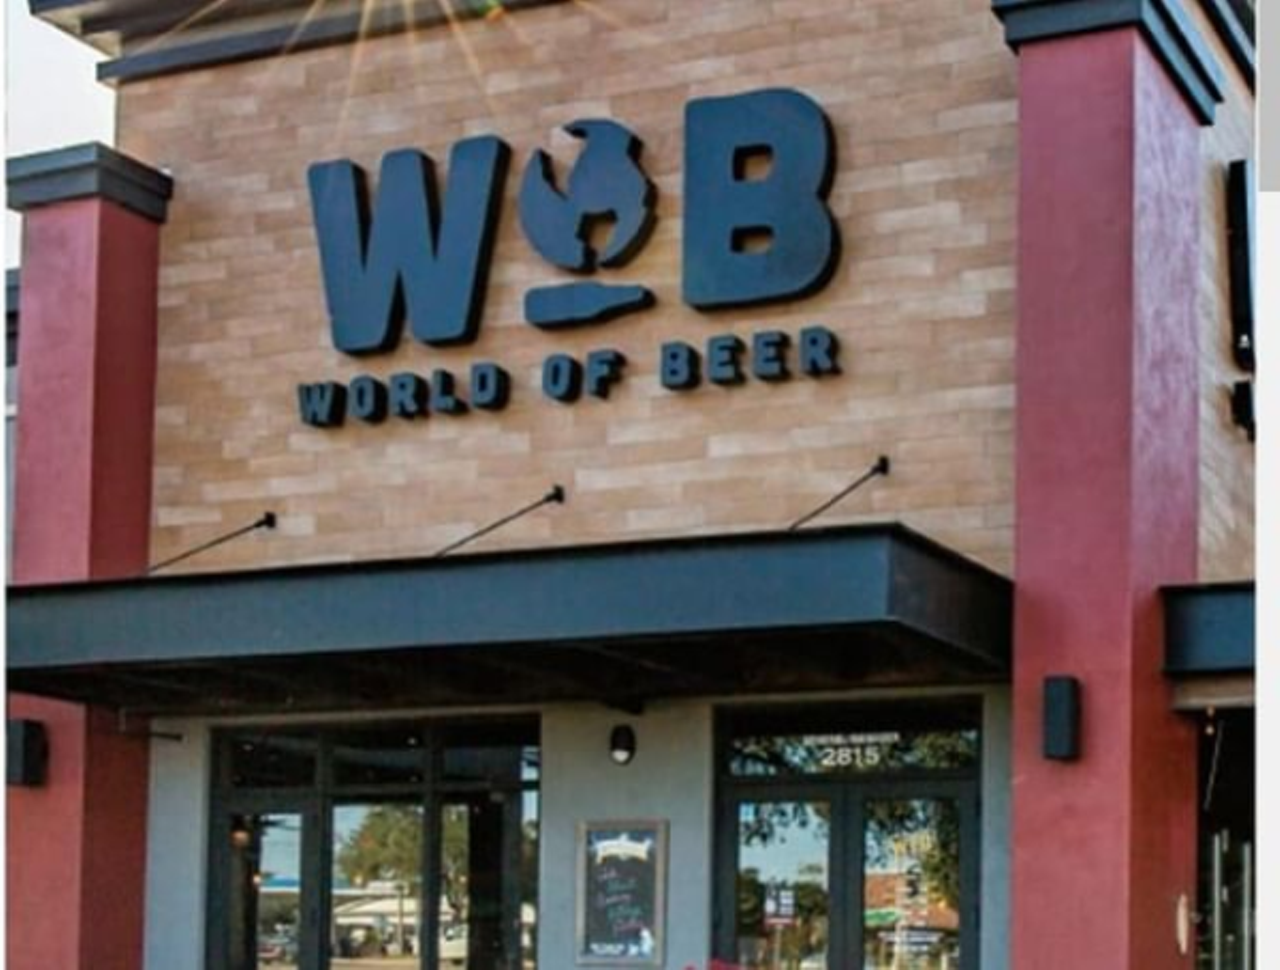 World of Beer
5311 Avion Park Drive, Tampa. 813-930-5499
World of Beer is still open for takeout and delivery. If your UberEats order is $20 or more, you&#146;ll receive a free German pretzel. Additionally, the restaurant is offering a 50% off discount for all first responders. The restaurant is offering curbside pickup and contactless delivery. 
Photo via  World of Beer&#146;s Instagram